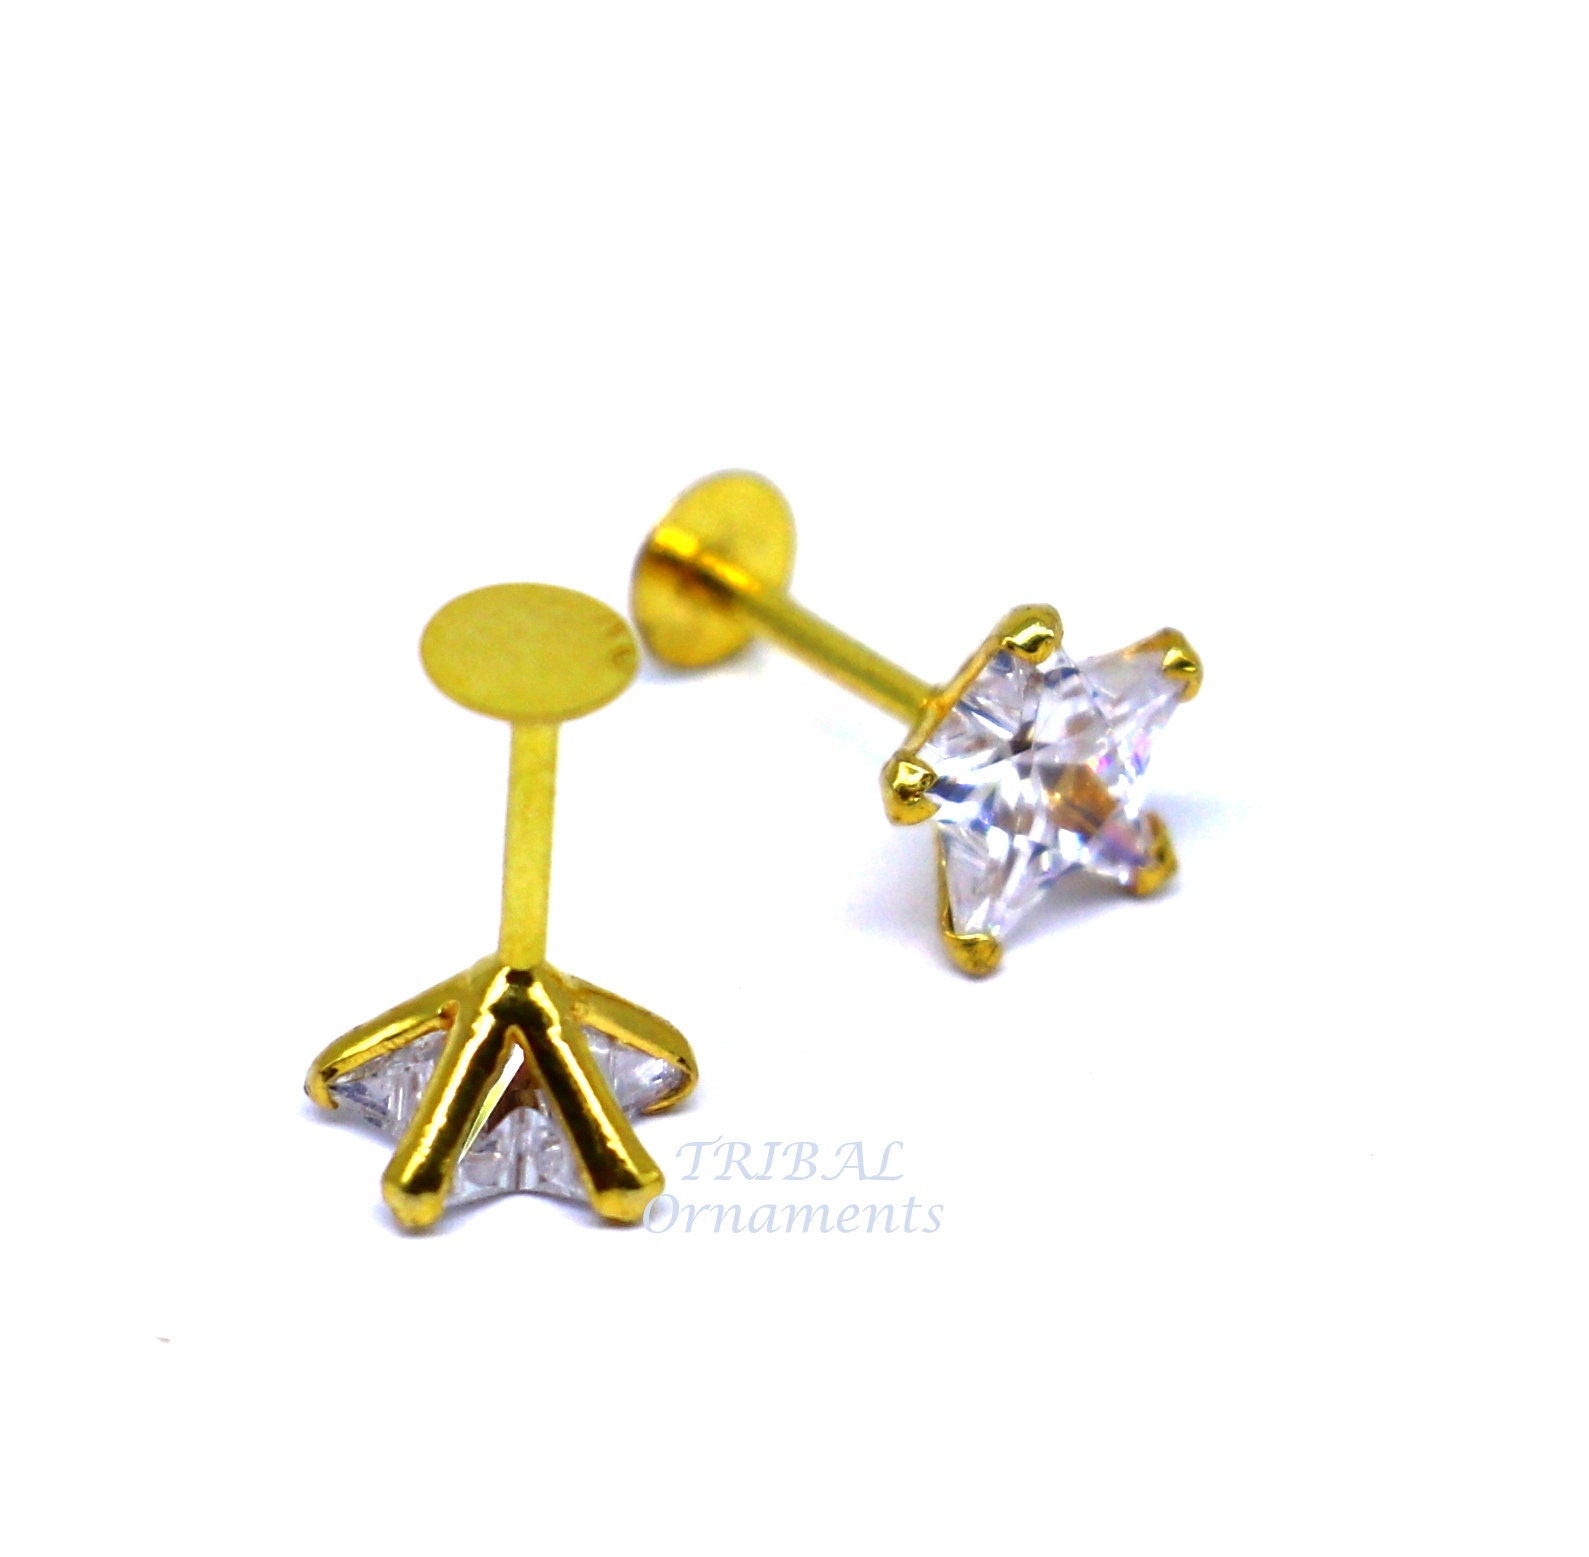 Buy Minimalist Star Shaped Stud Earrings Large Size Online in India - Etsy